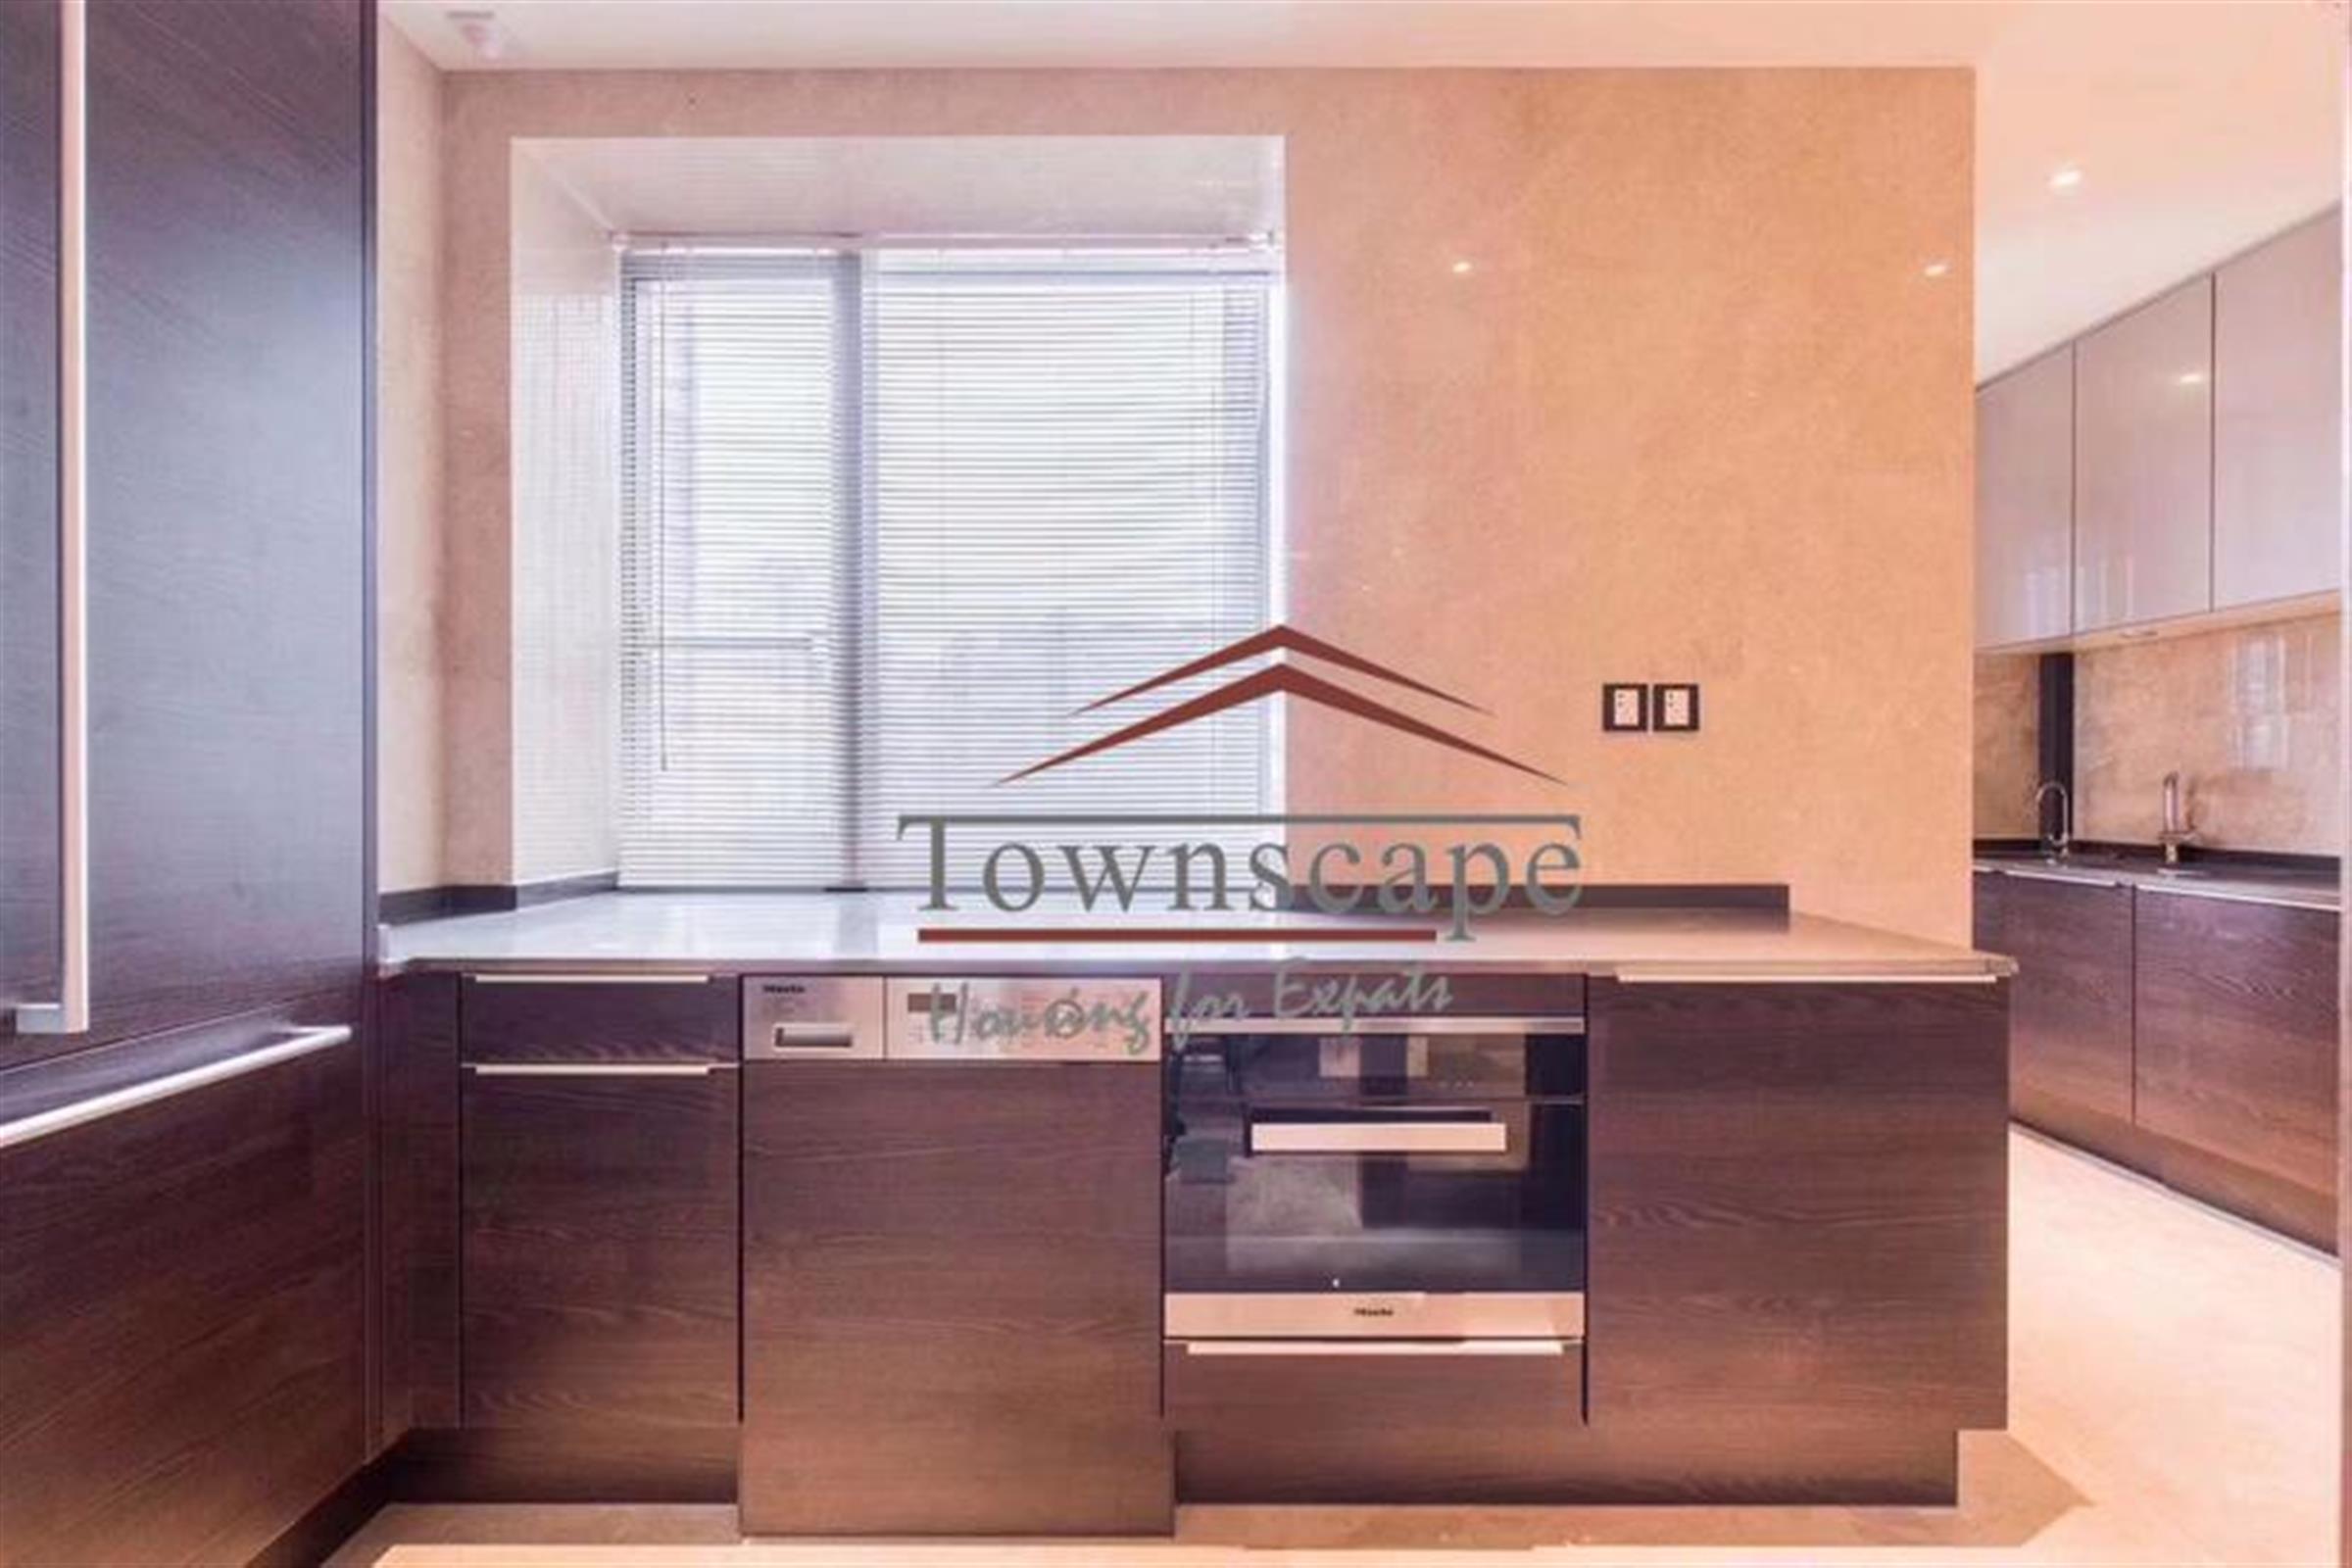 Oven and dishwasher Luxury New Spacious Xintiandi Apartment for Rent in Shanghai